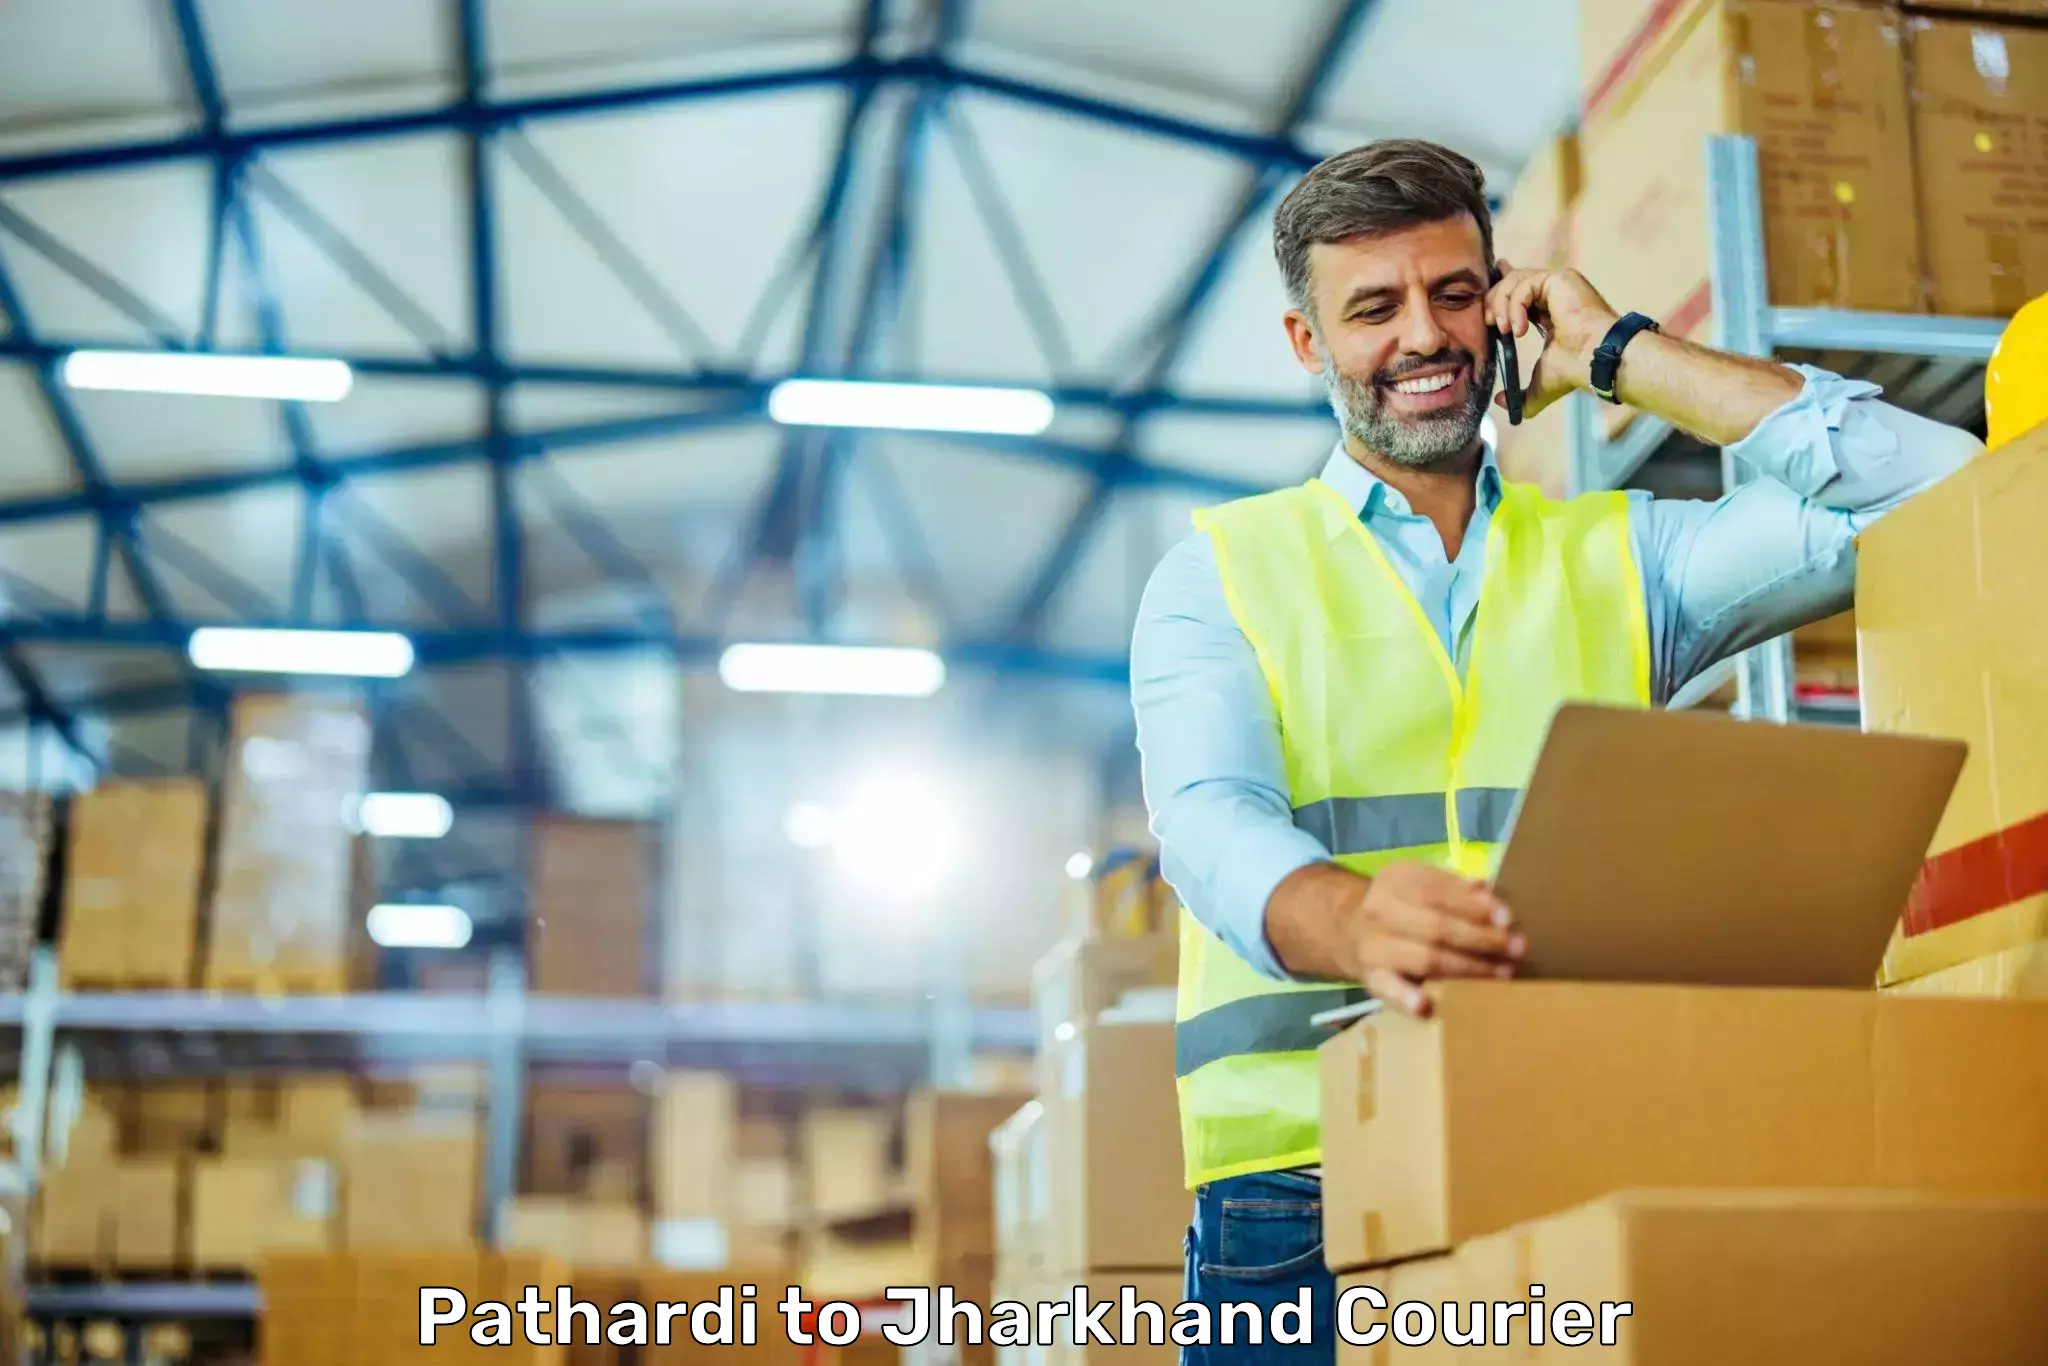 Fastest parcel delivery Pathardi to Peterbar